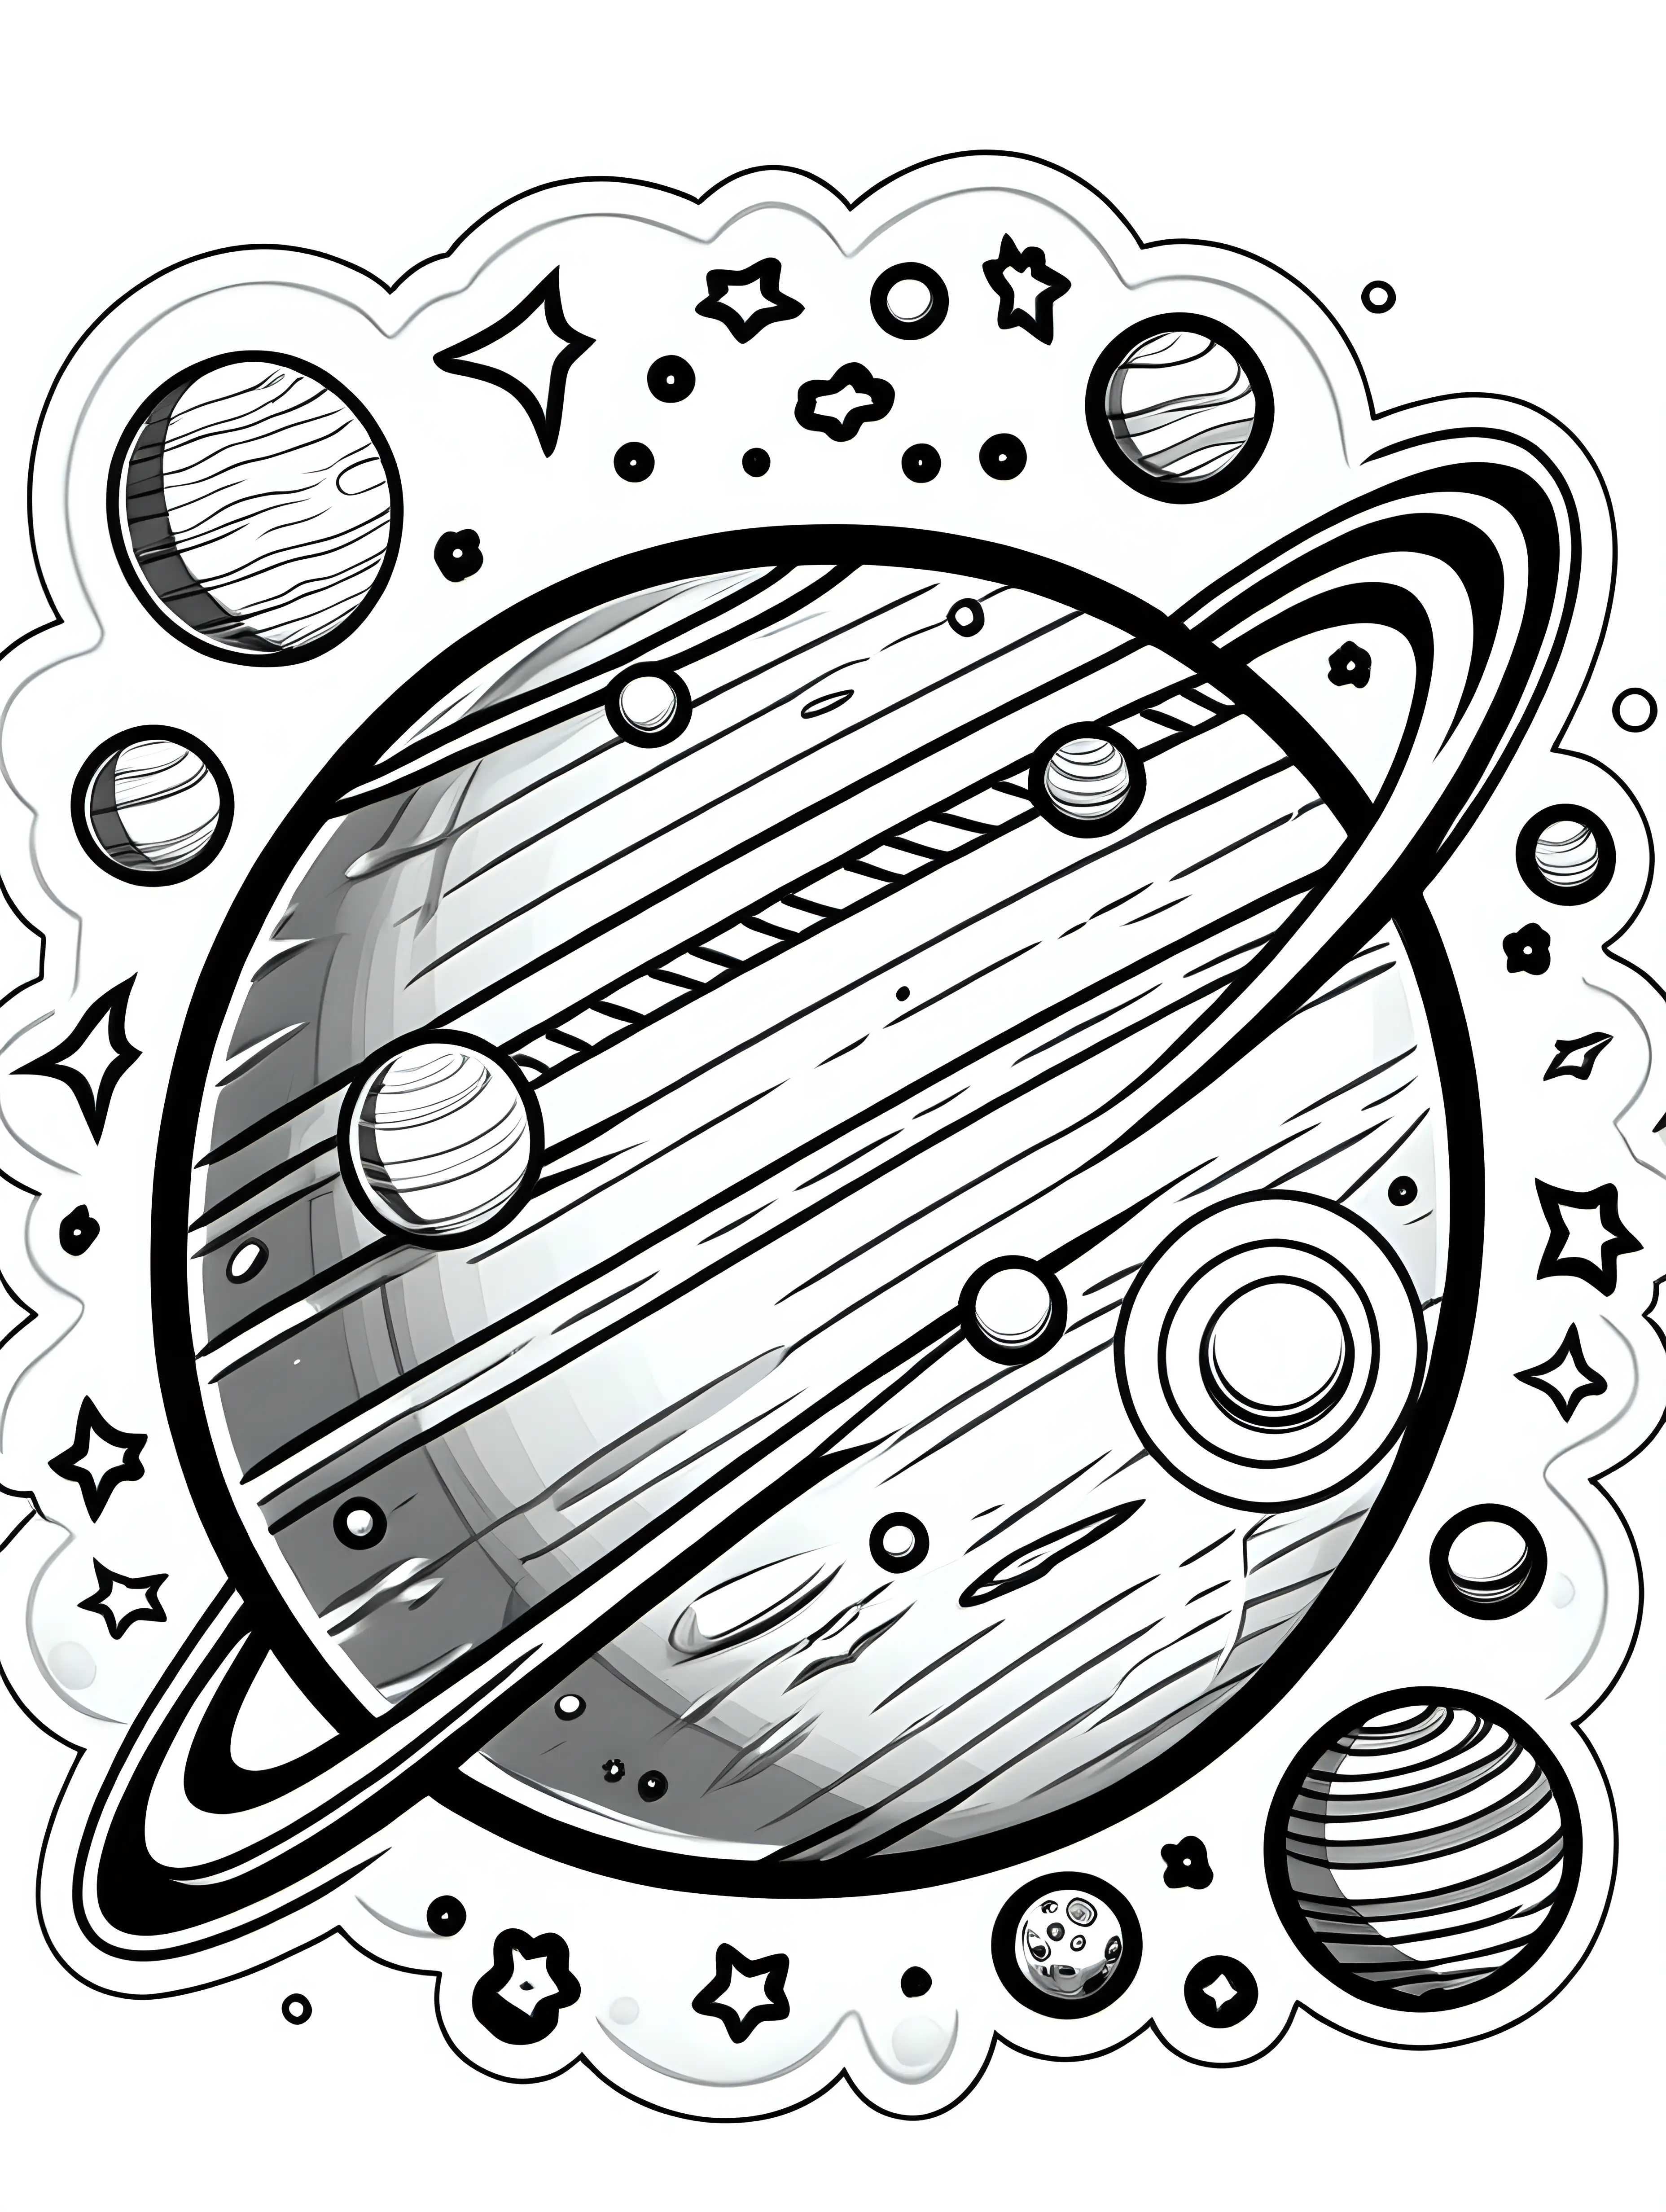 cartoon, planet, sticker, black and white coloring book image